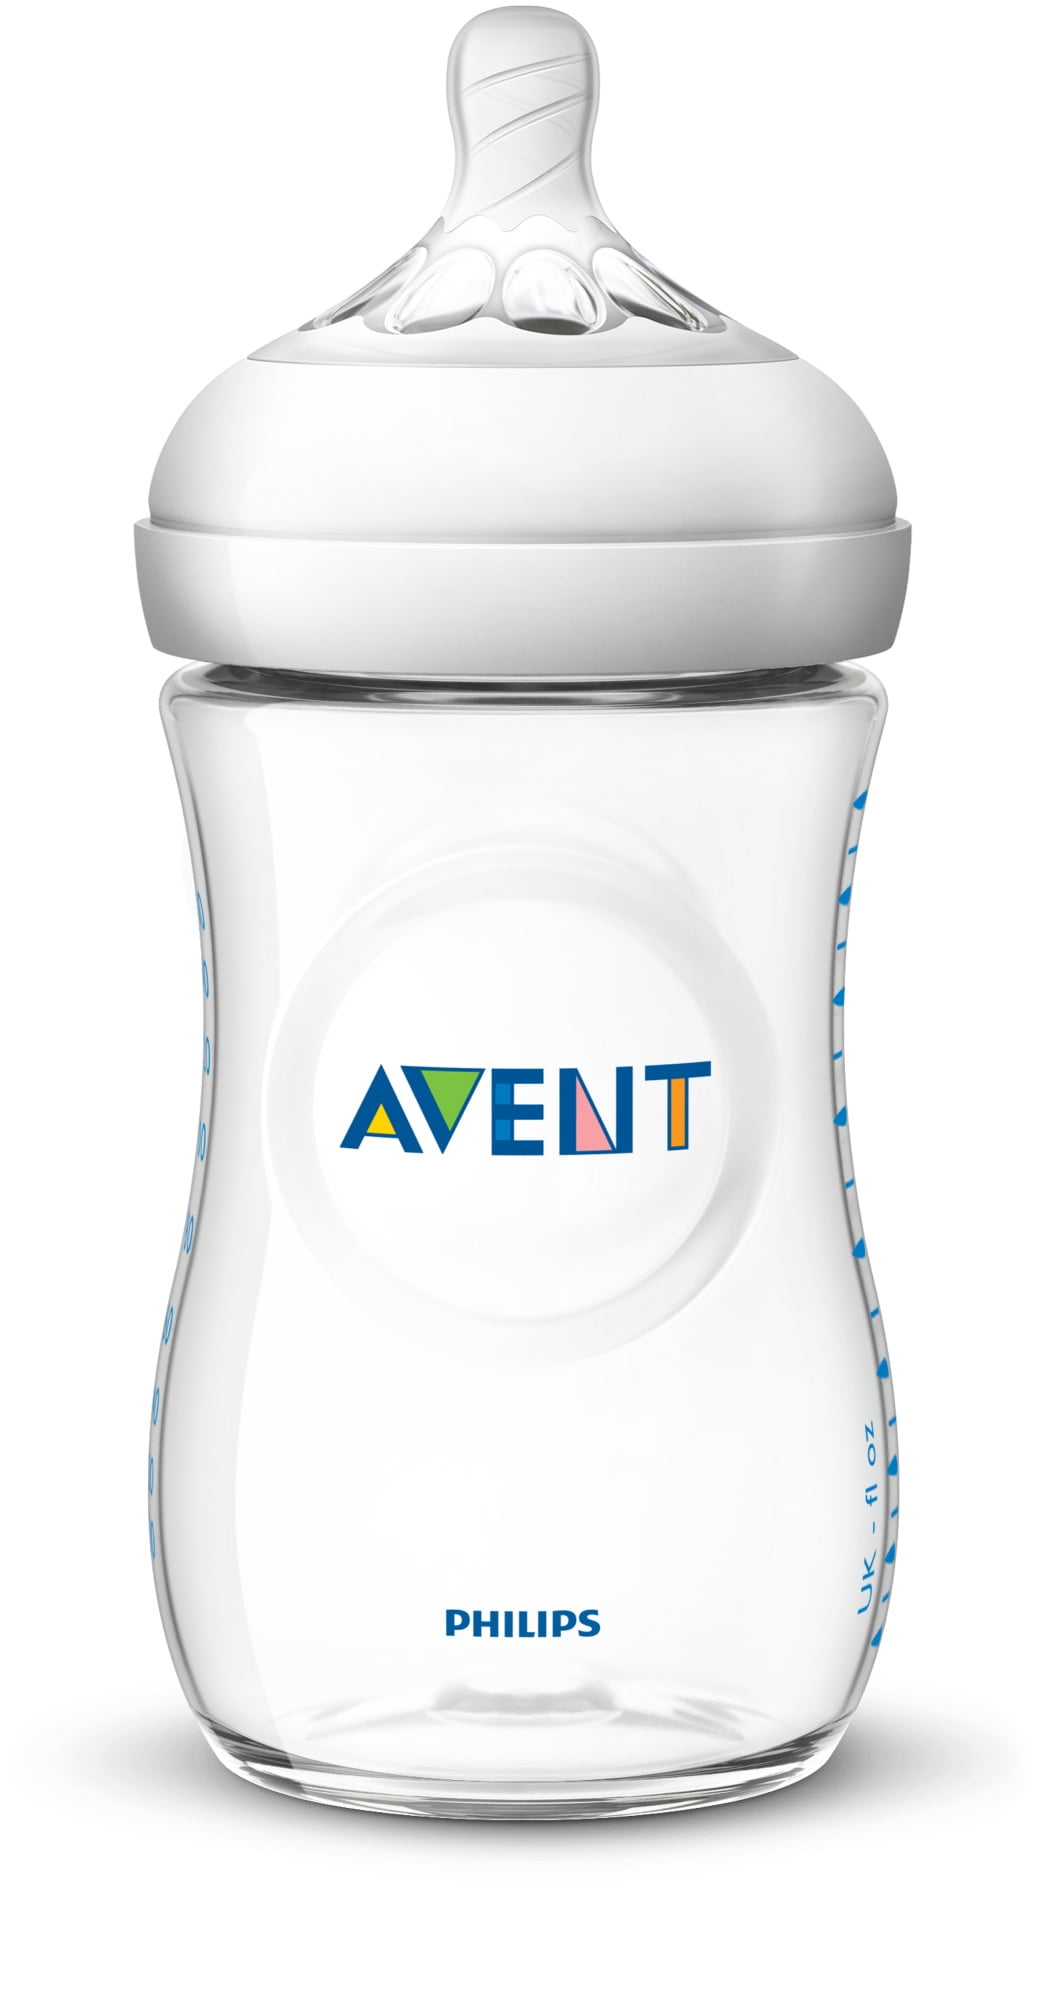 Philips AVENT Anti-colic Baby Bottles Clear, 9oz, 1 Piece (SCF403/17)